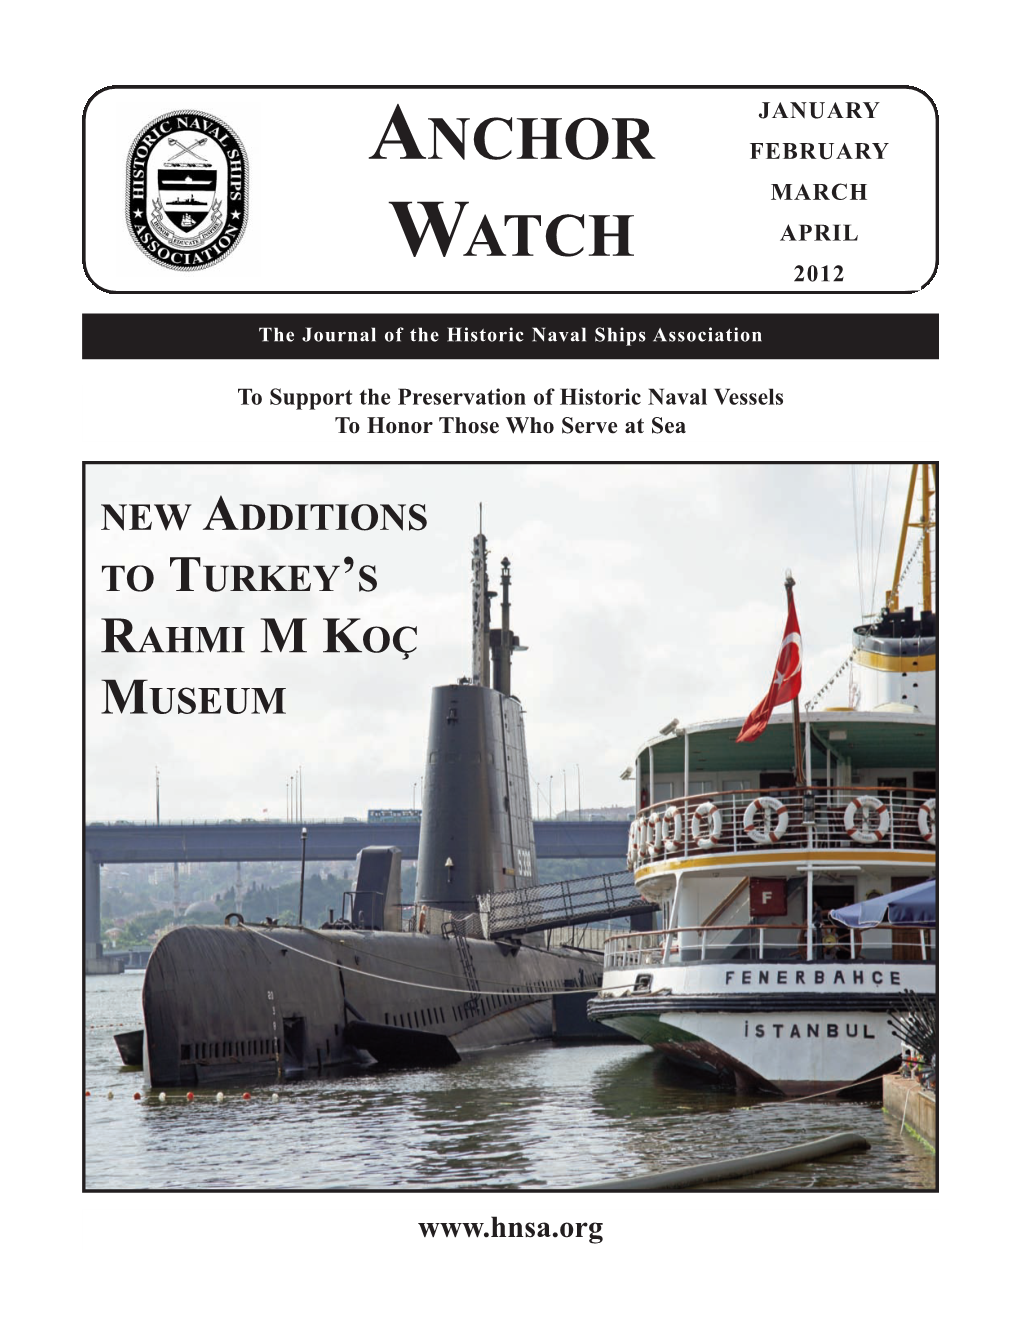 Winter 2012 AW:Winter 2006 HNSA Anchor Watch.Qxd 1/16/2012 12:59 PM Page 1